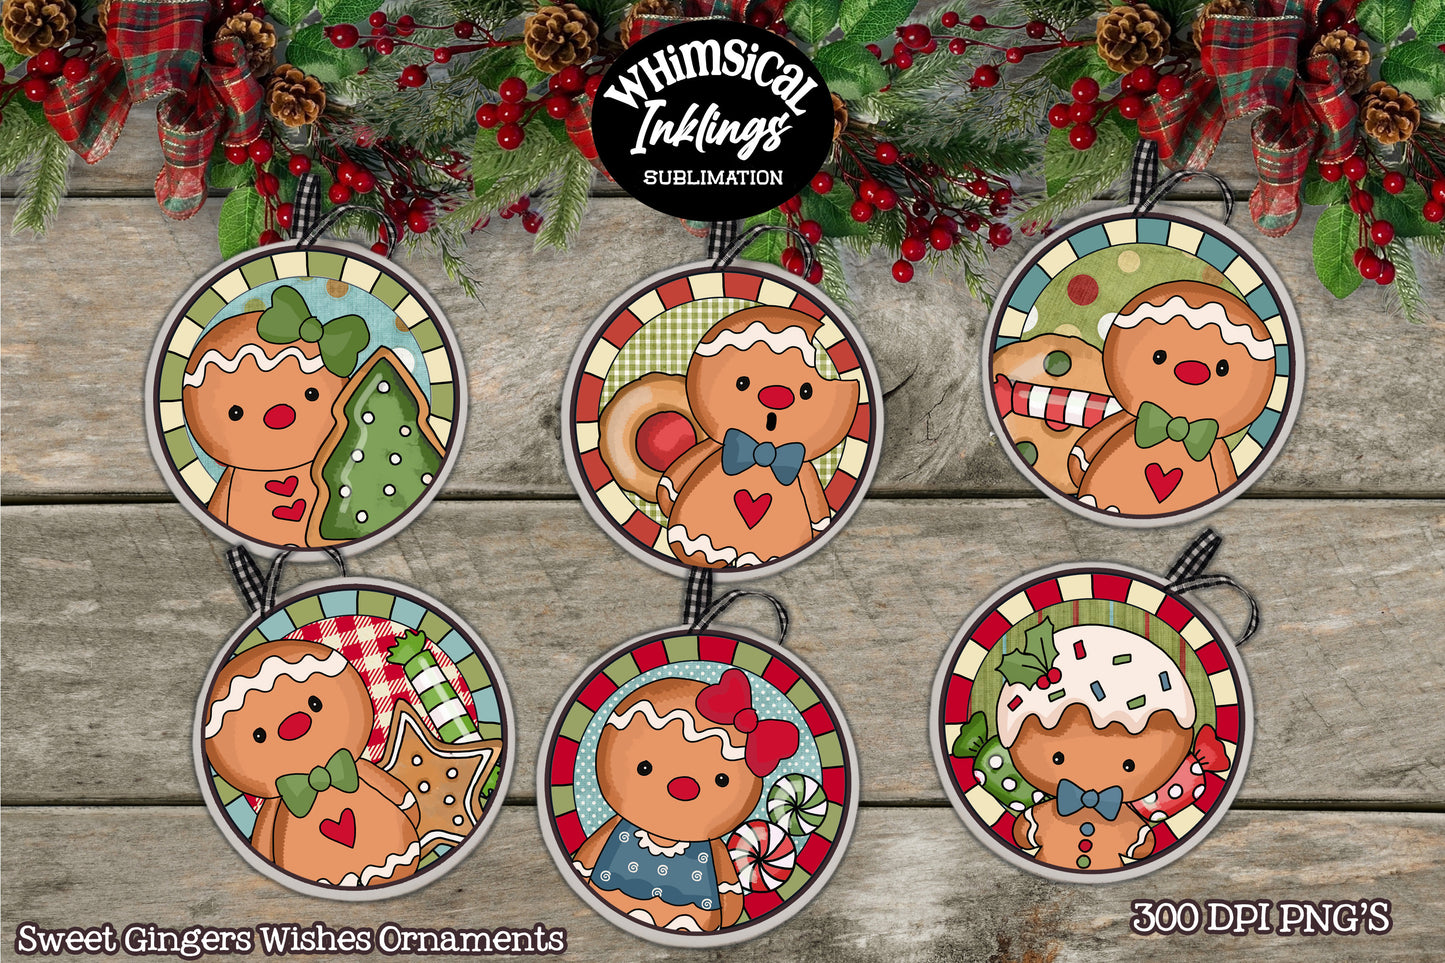 Sweet Gingers- Christmas Ornament Sublimation Set